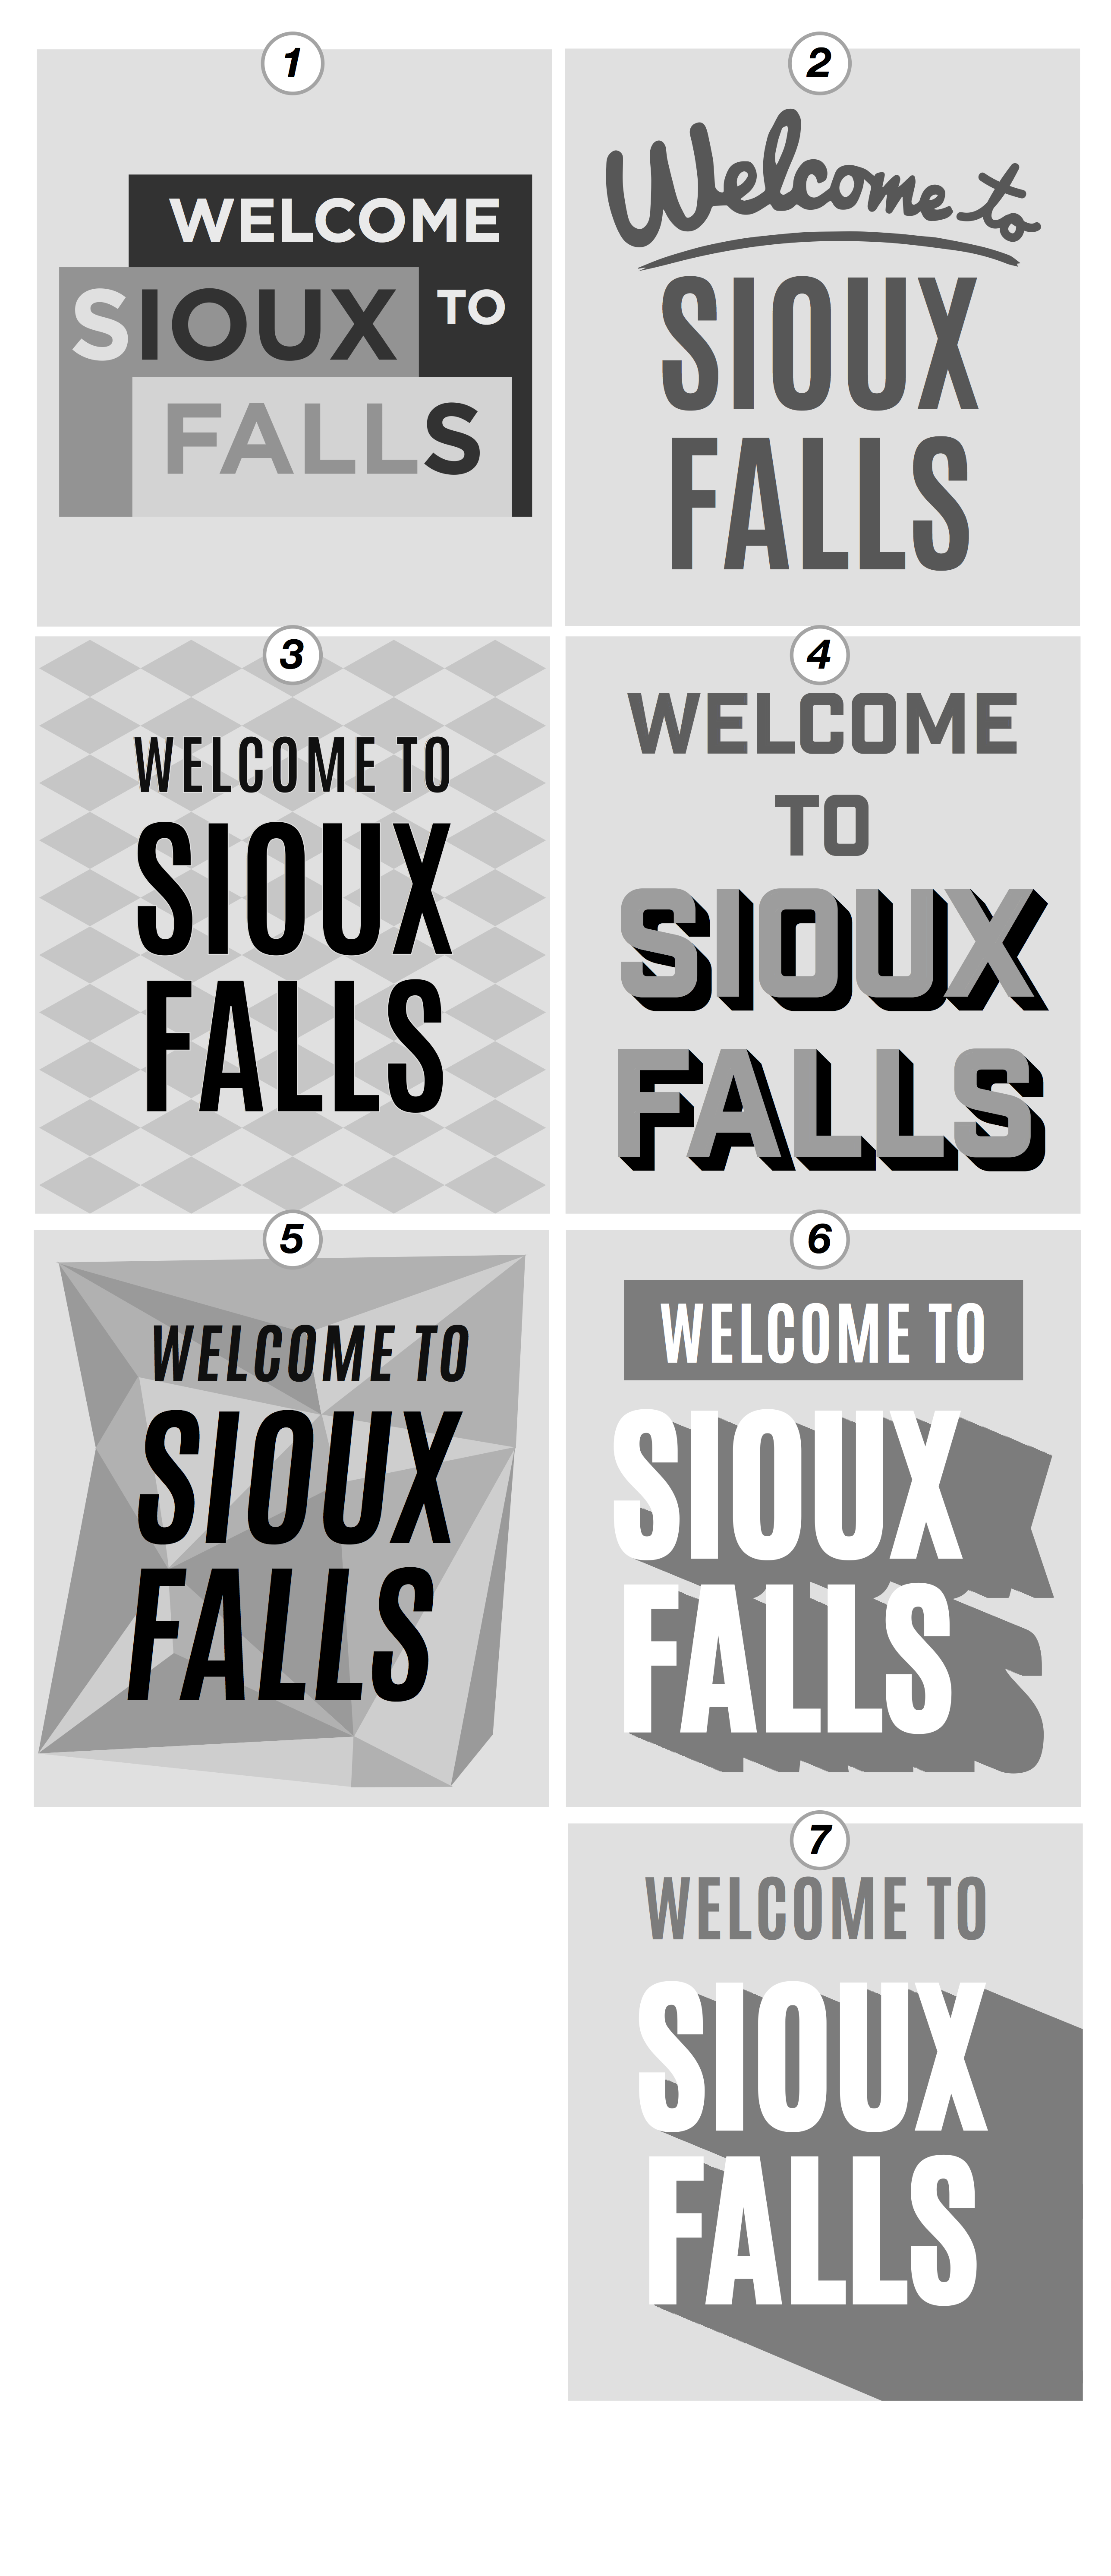 Welcome to Sioux Falls roof designs